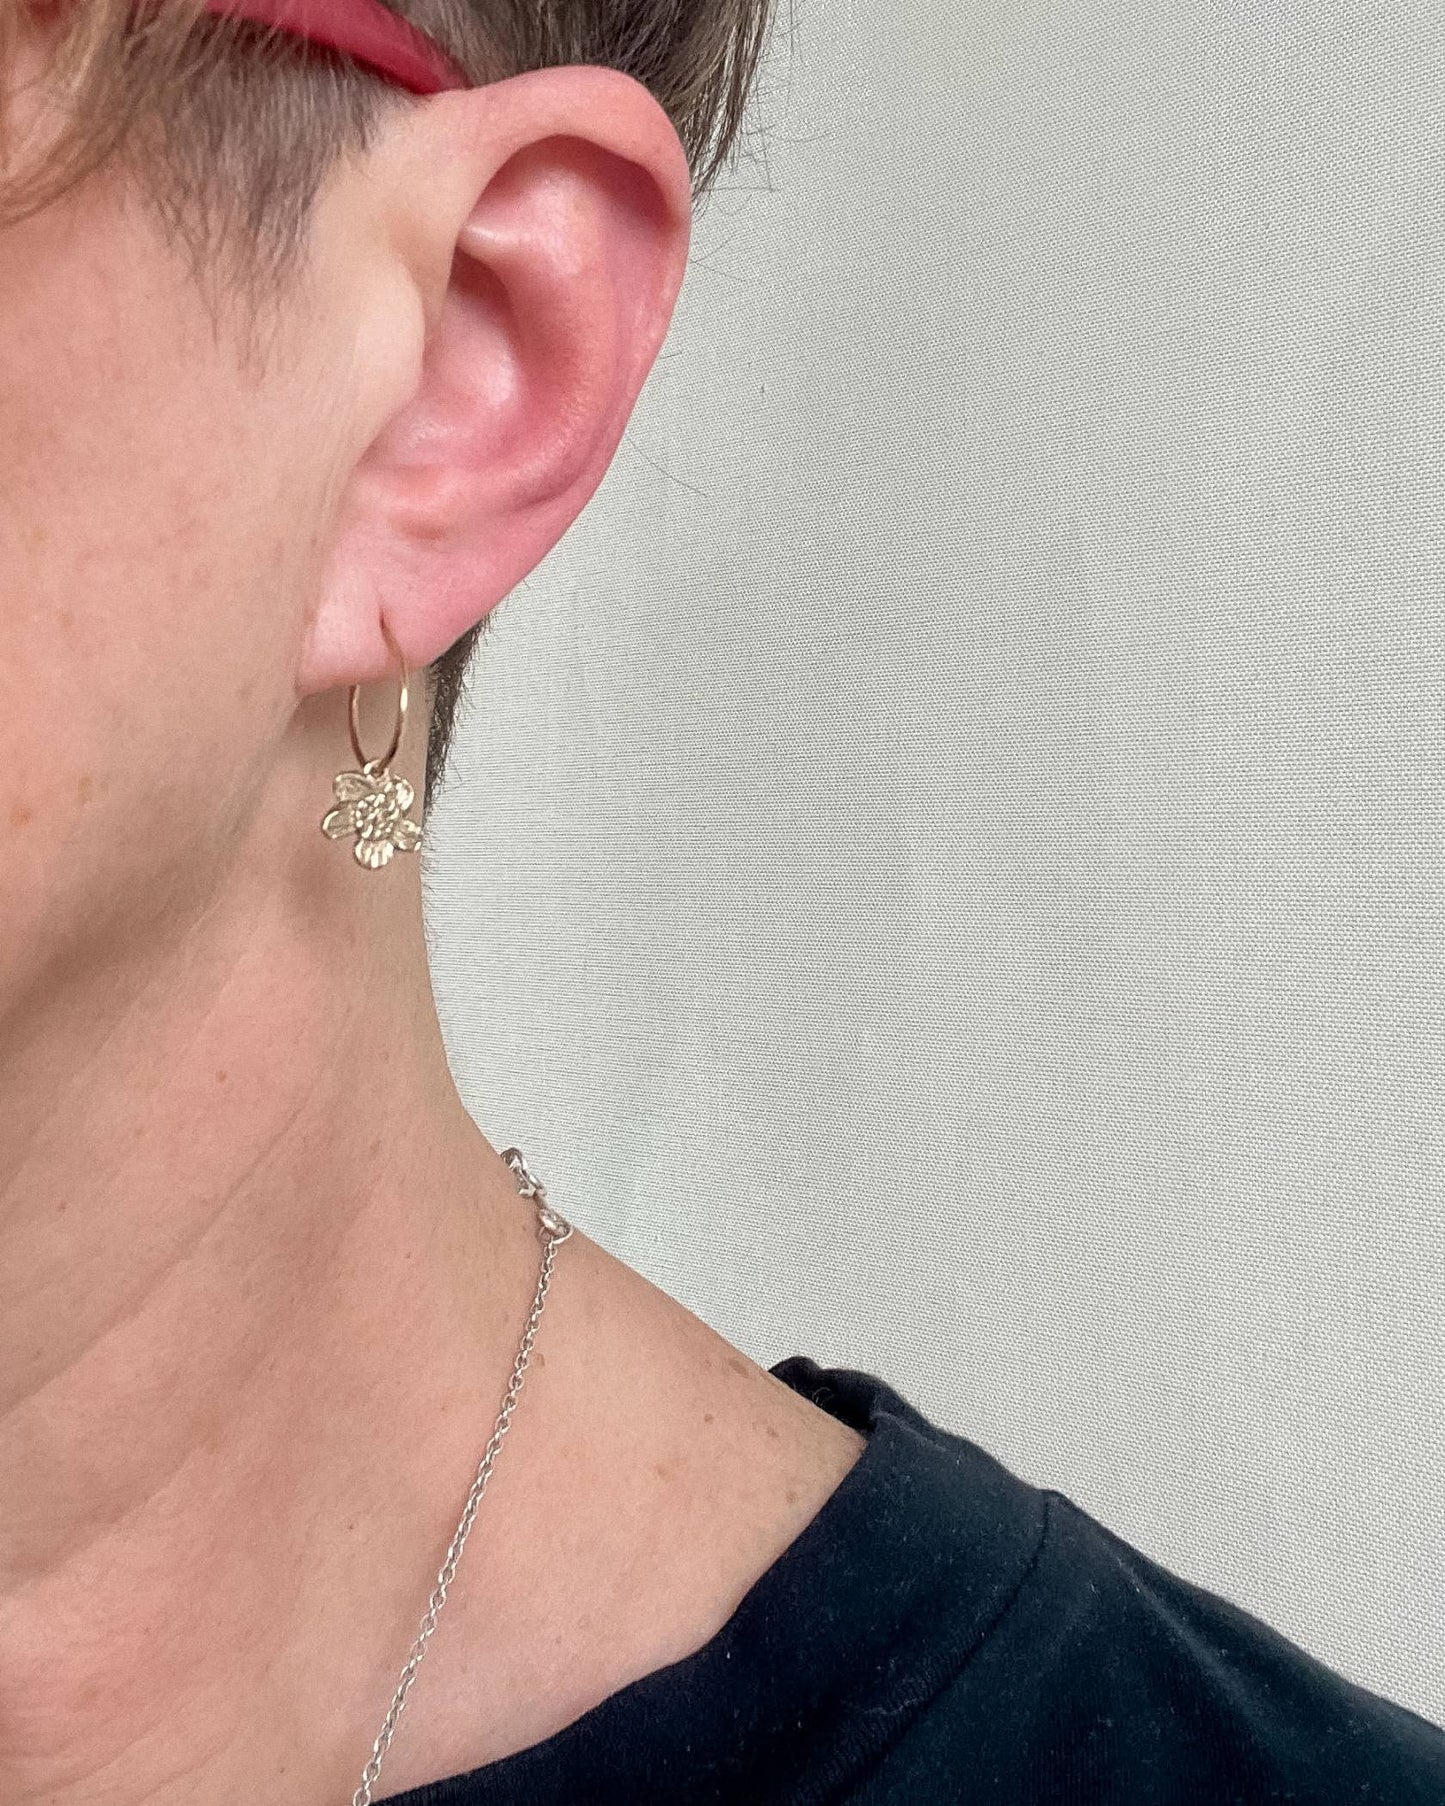 Showing the side profile of a woman wearing the 9ct Yellow Gold small hoop earring with a daisy charm